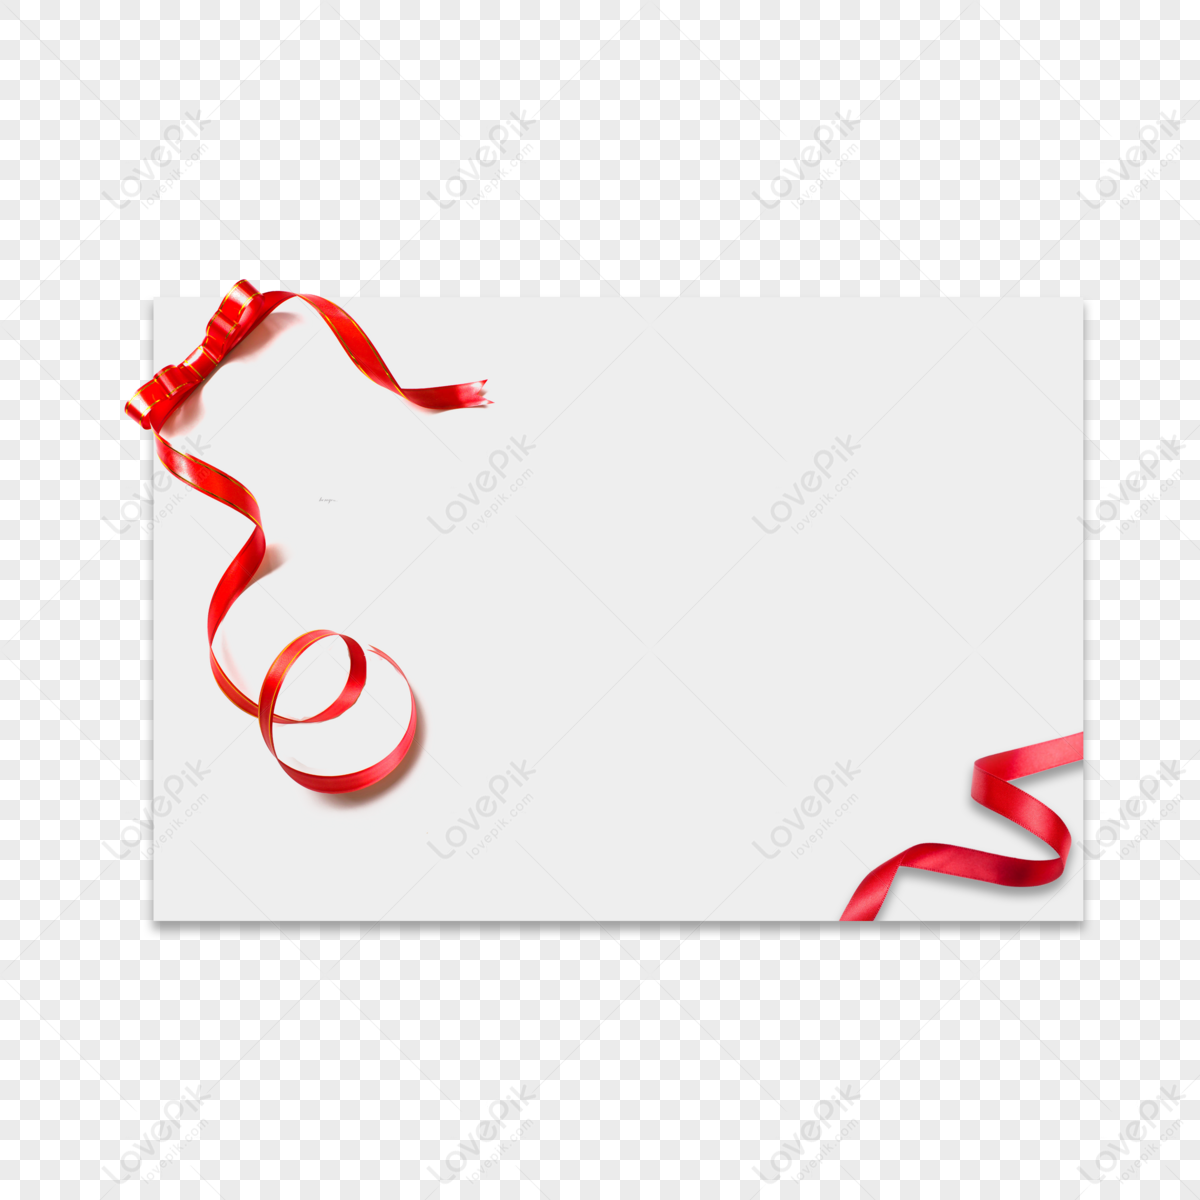 Gift Card Transparent PNG - 1039x600 - Free Download on NicePNG